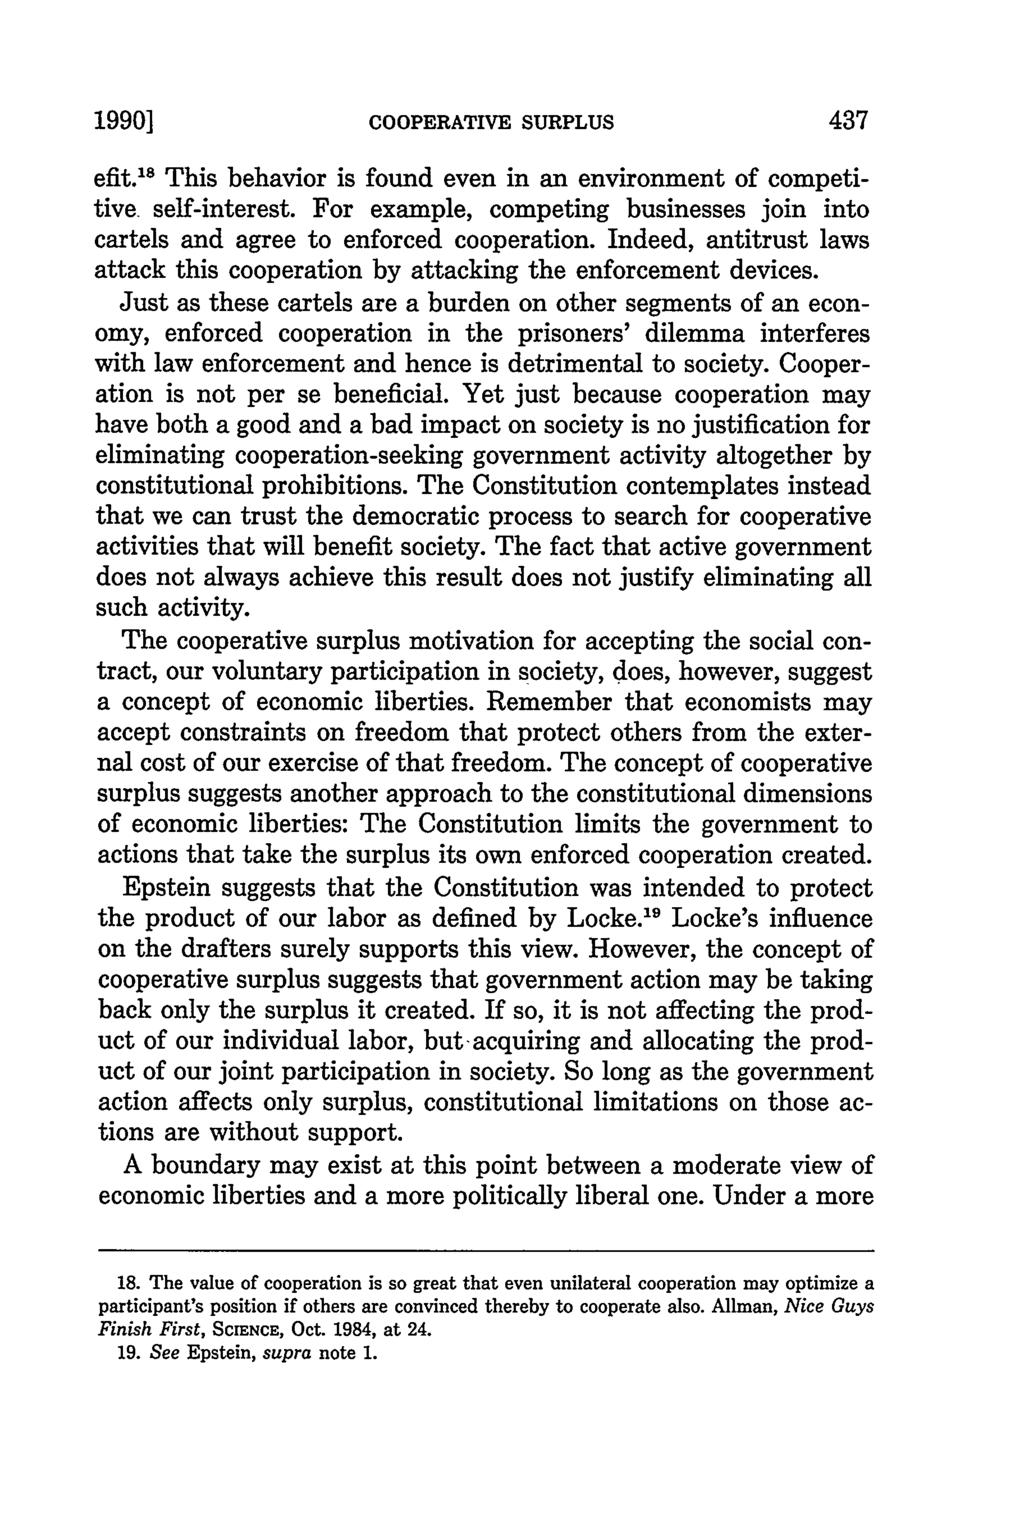 1990] COOPERATIVE SURPLUS efit. 18 This behavior is found even in an environment of competitive self-interest. For example, competing businesses join into cartels and agree to enforced cooperation.